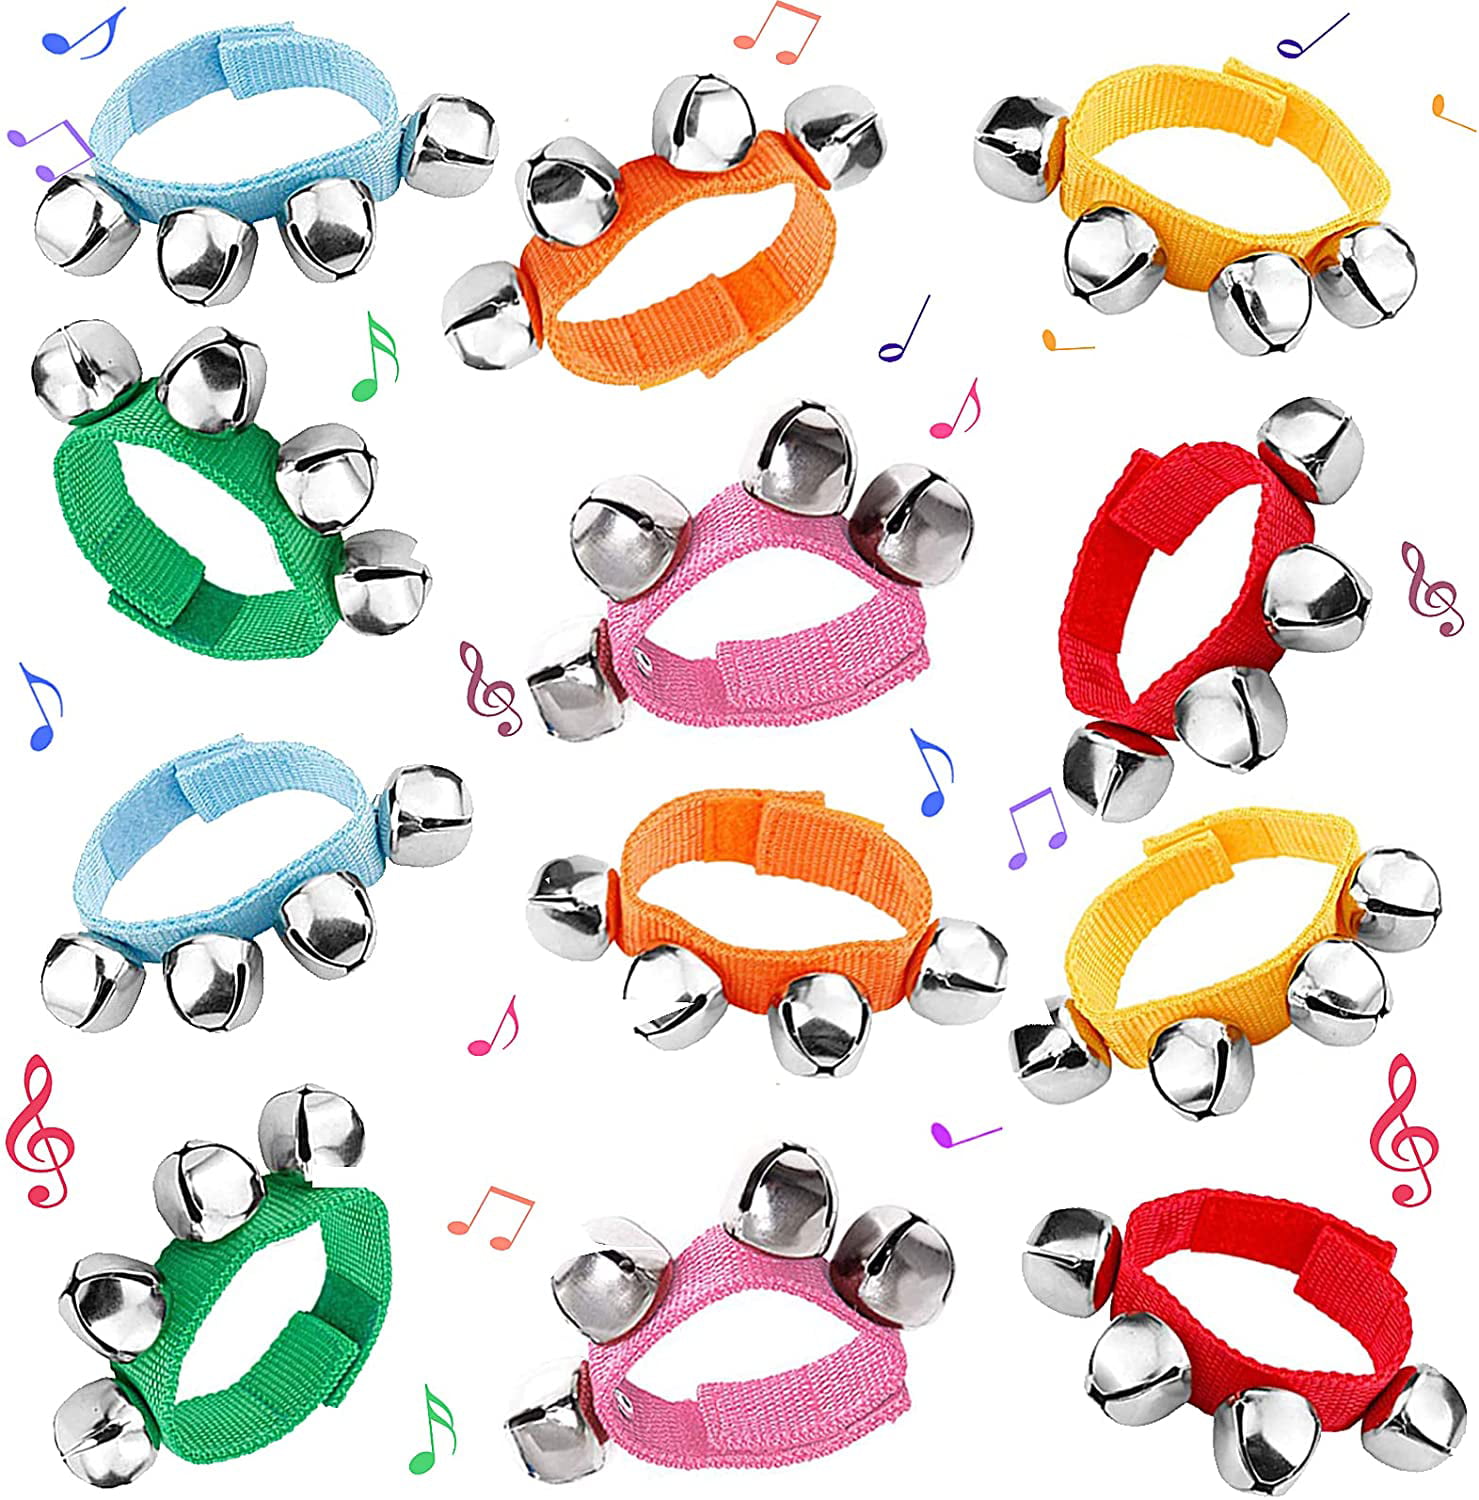 5 Pcs Wrist Band Jingle Bells,5 Different Colors Musical Instruments Gift for Kids 